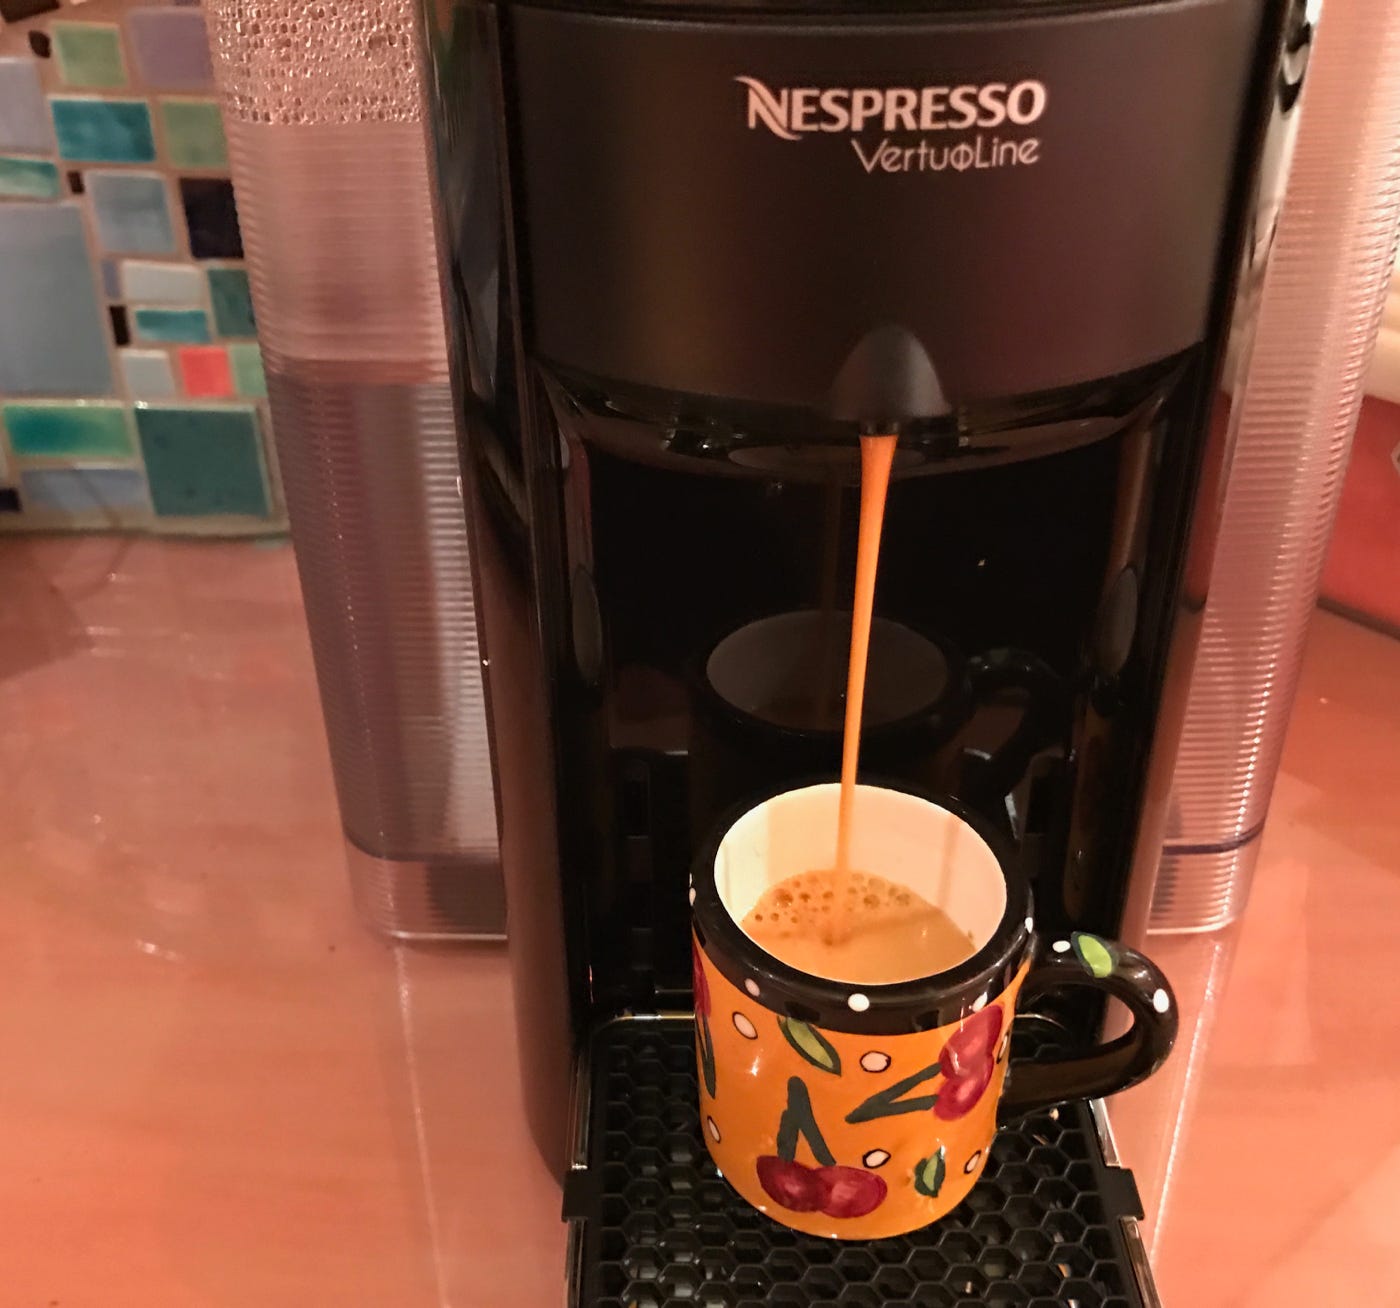 Confessions of a New Nespresso Buyer | by Len Edgerly | Medium